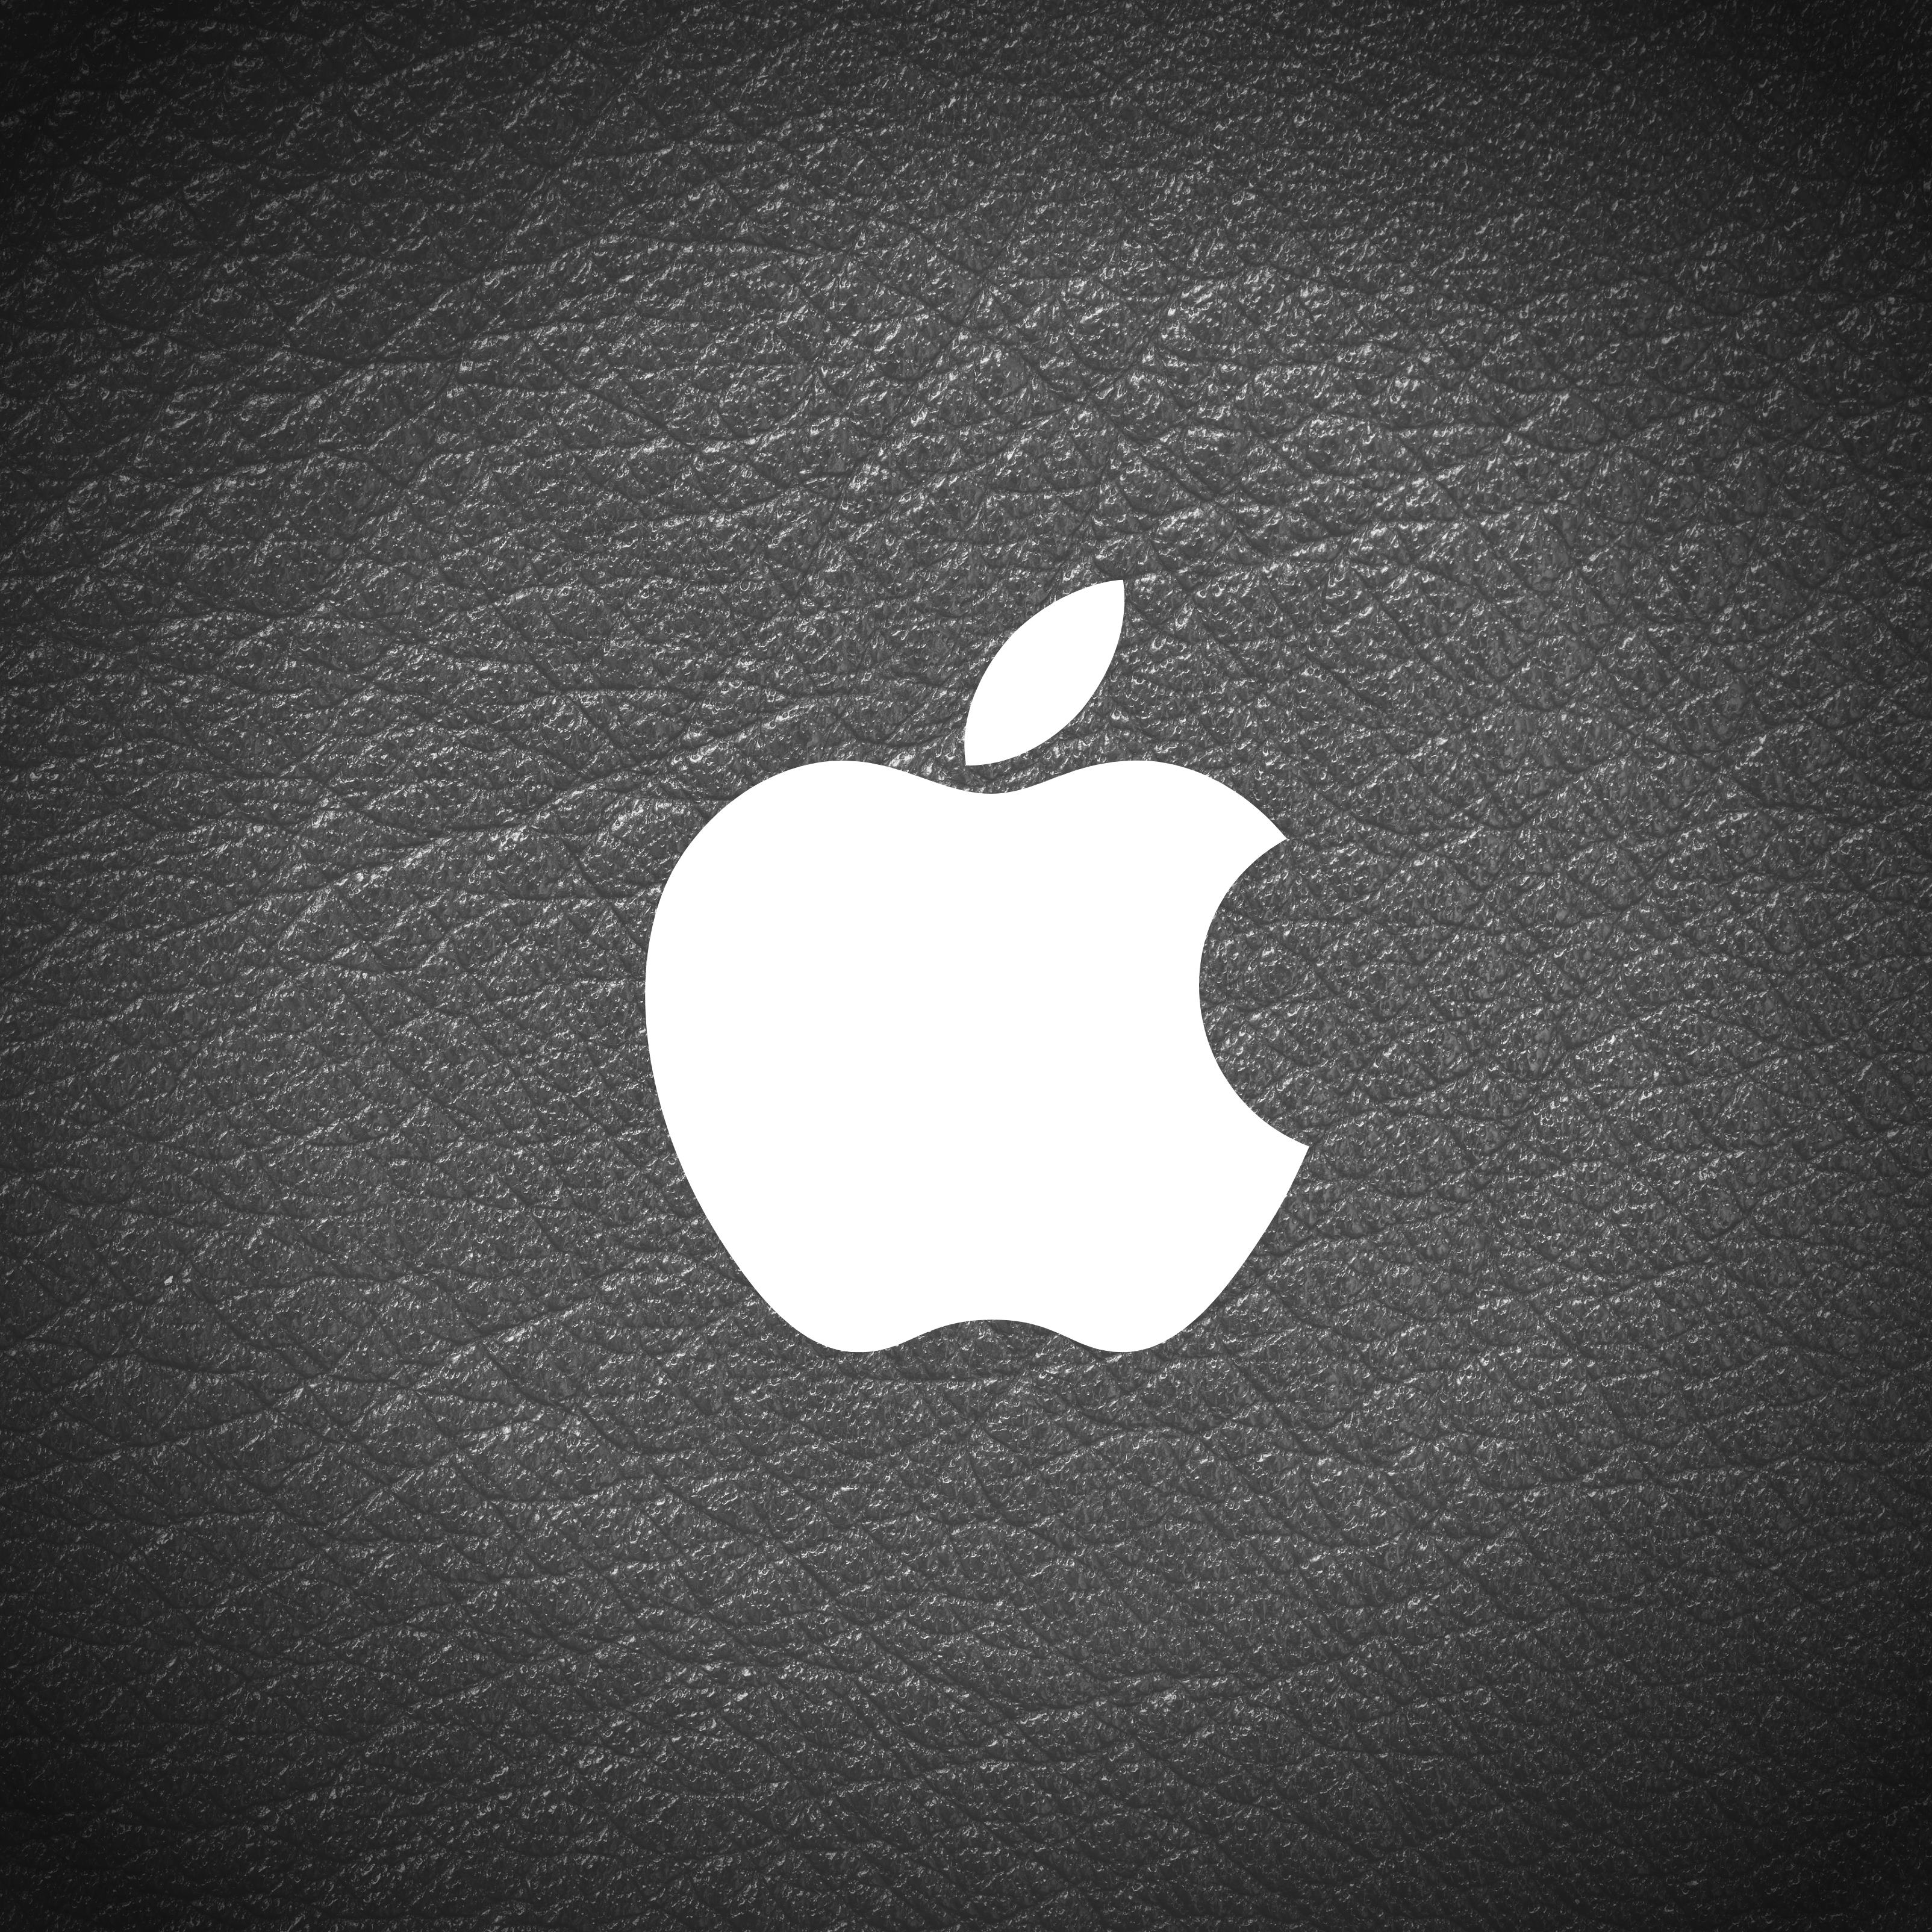 iPad Air wallpapers Apple Logo Leather Black and White iPad Wallpaper